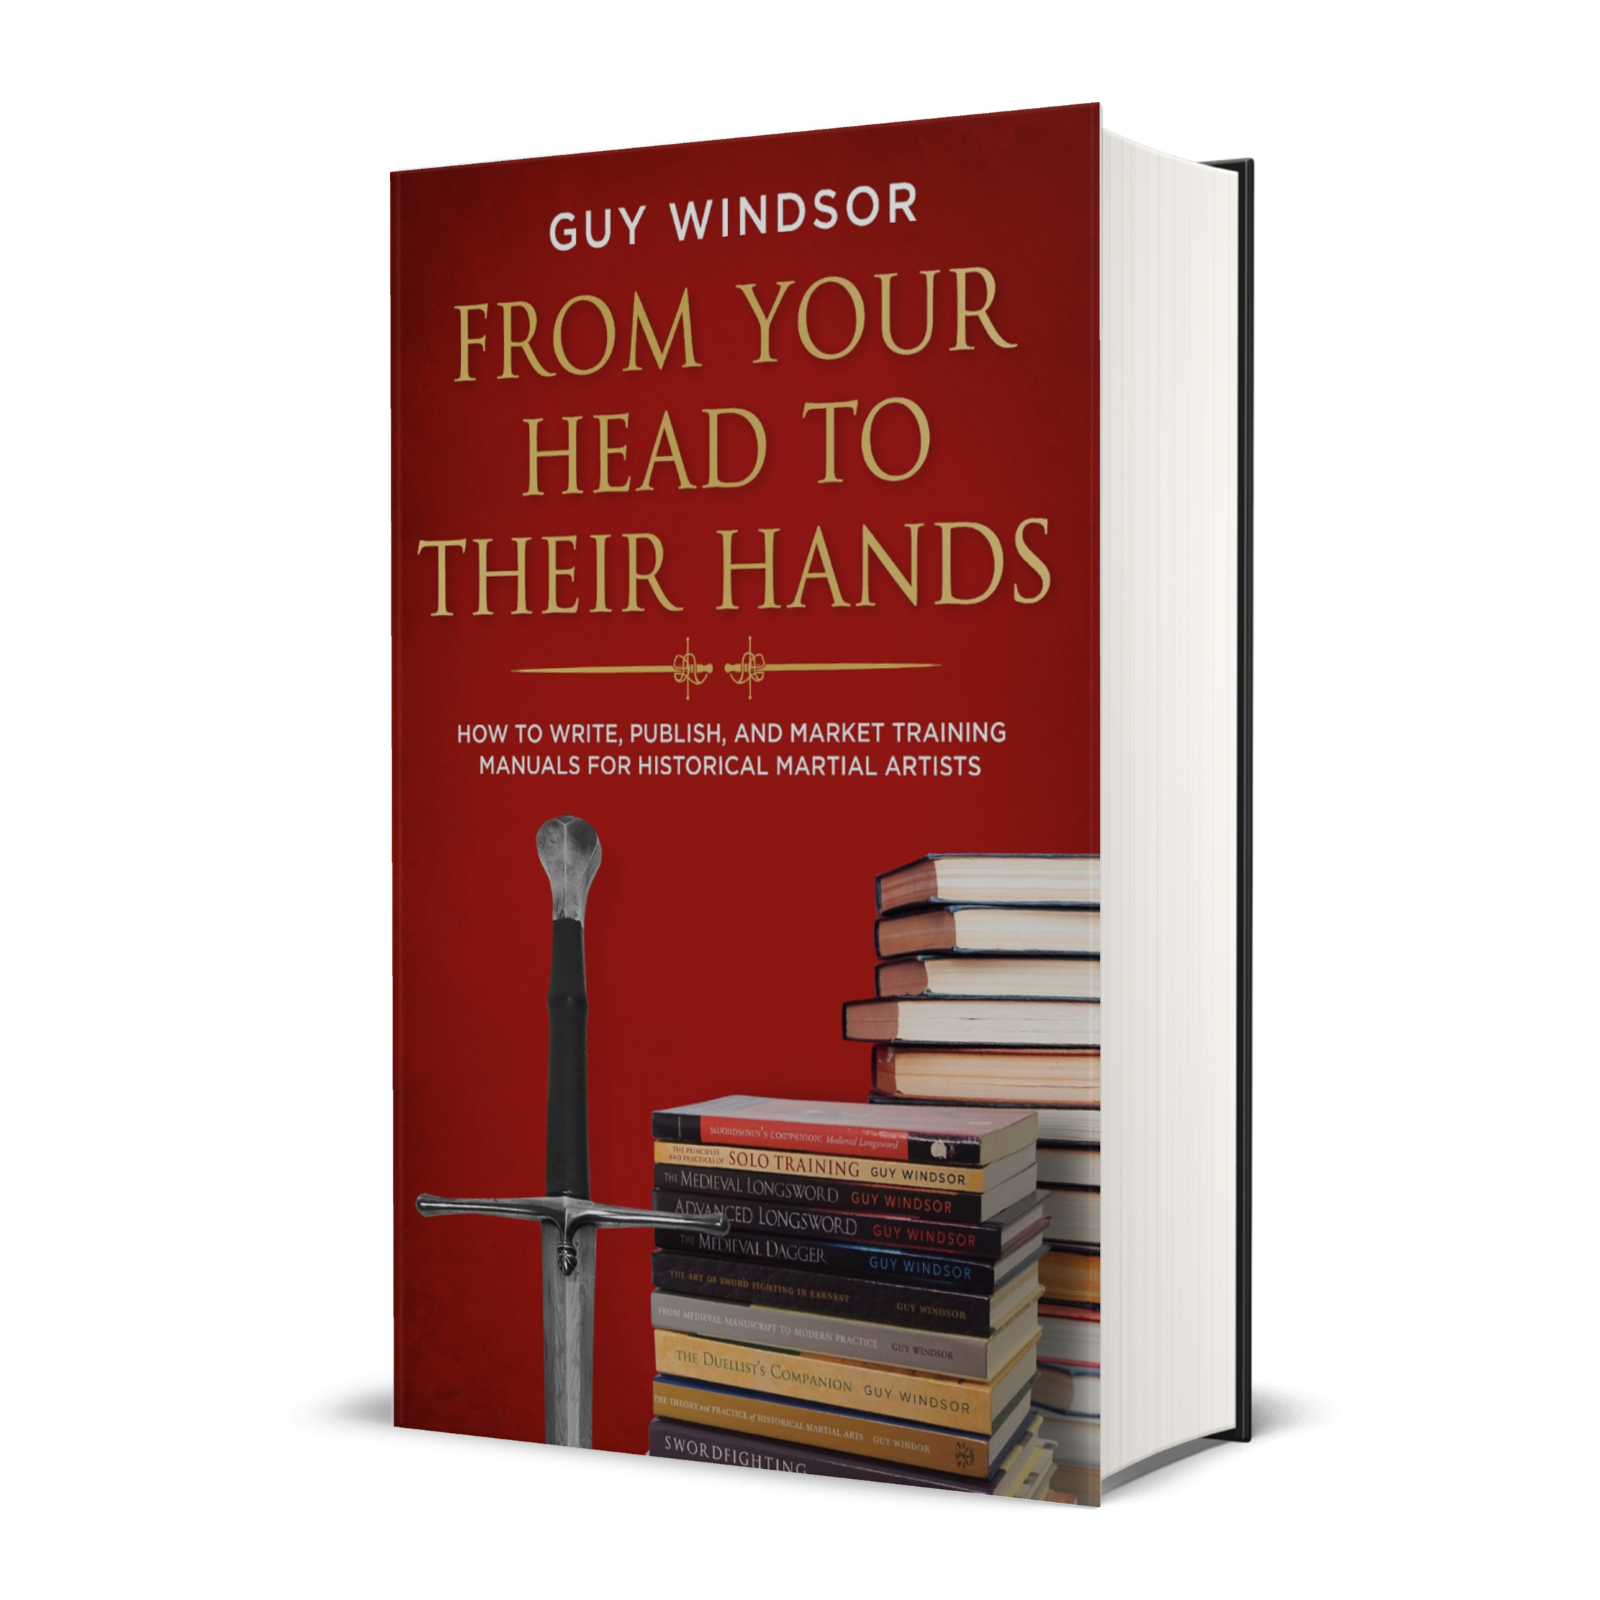 From Your Head to Their Hands: How to write, publish and market training manuals for historical martial artists by Guy Windsor